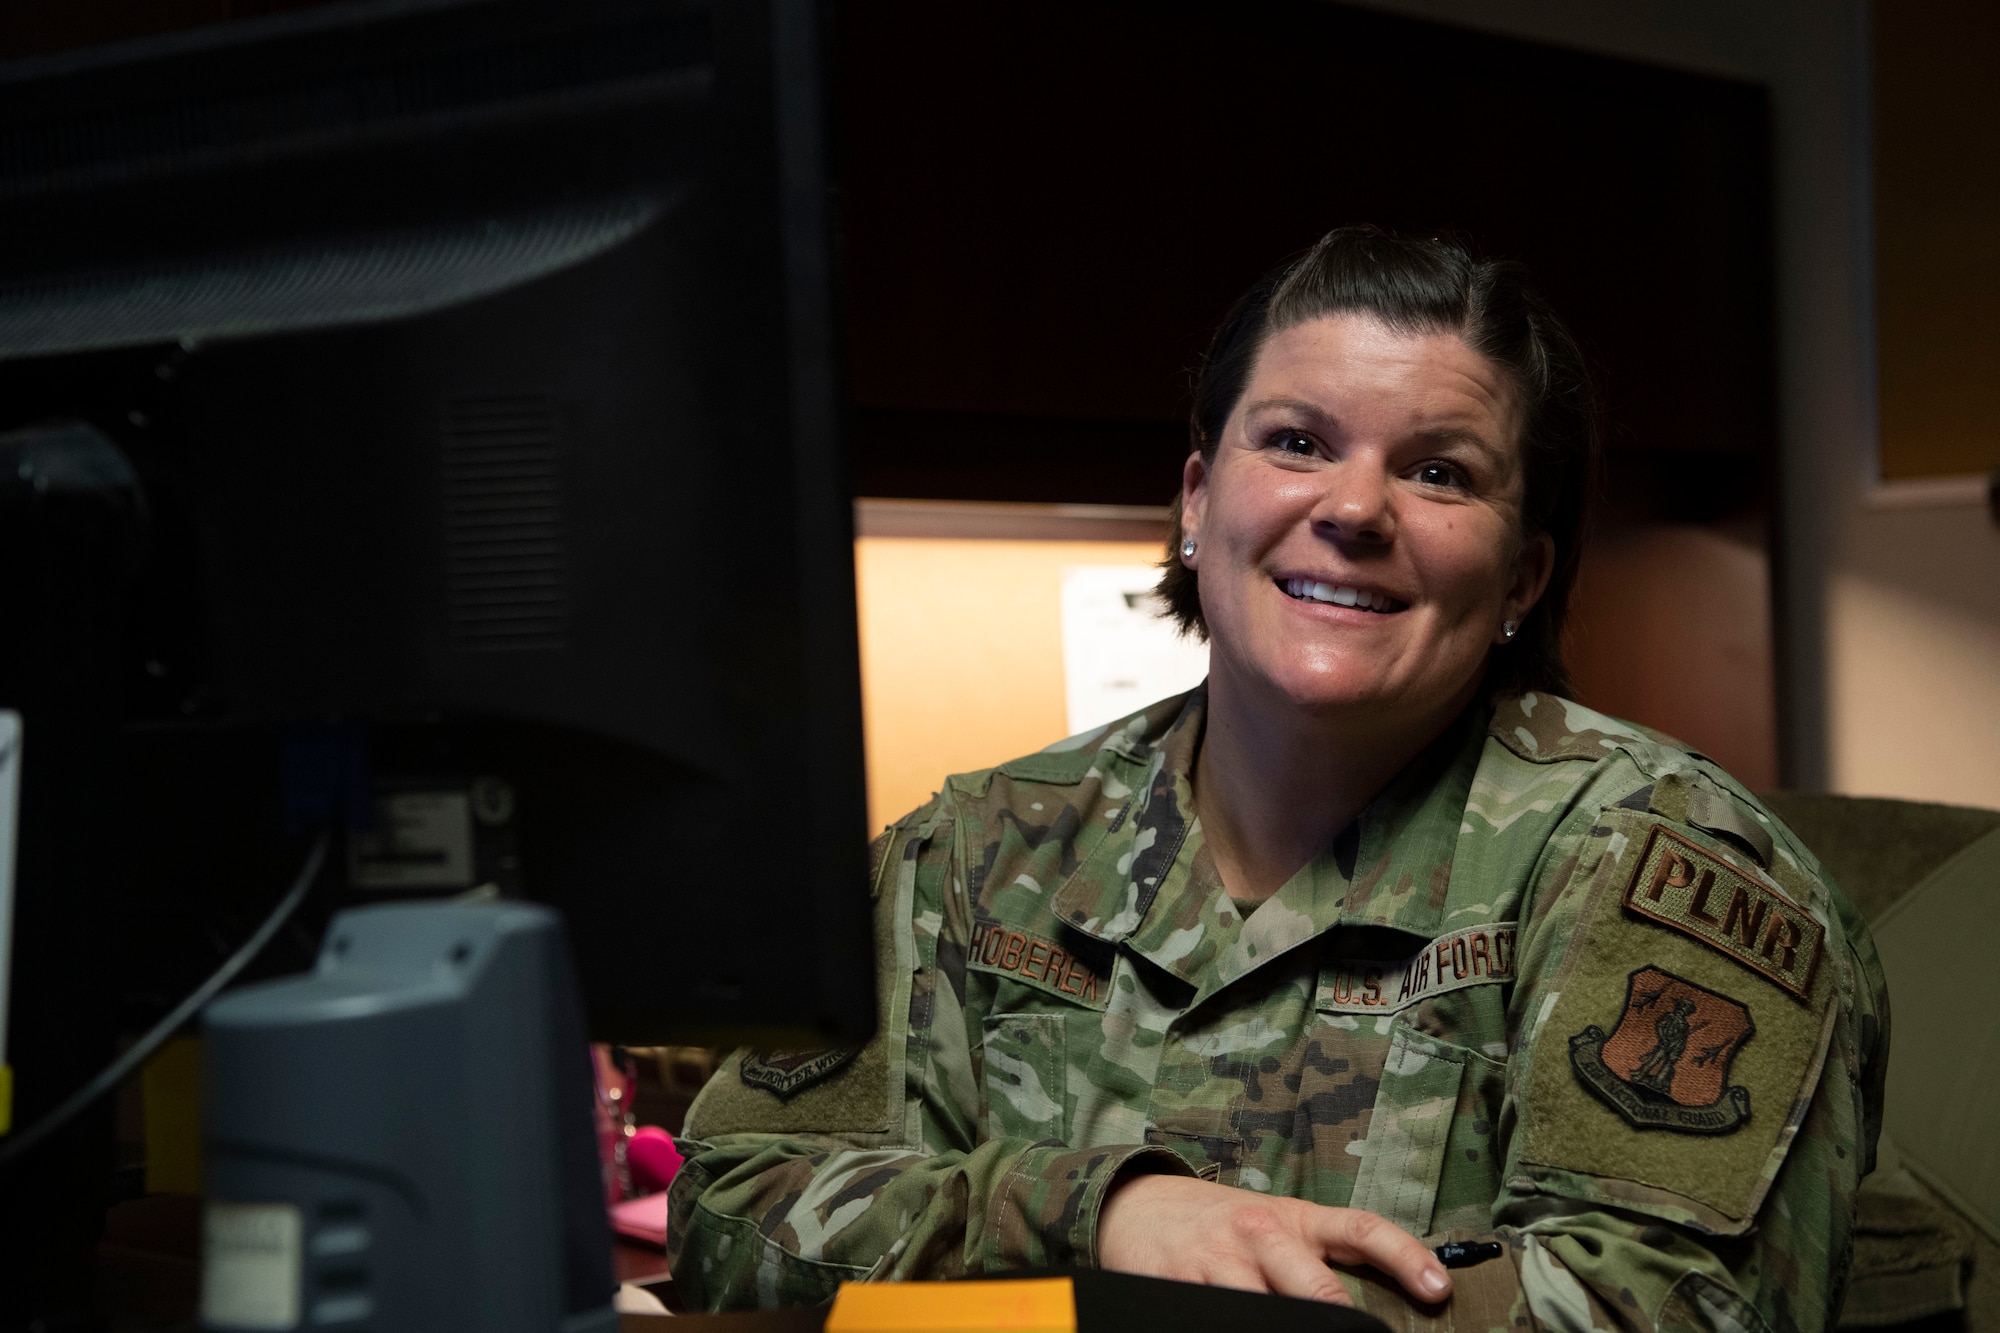 TSgt Courtney Hoberek, logistics planner at the 149th FW, tells her story on how she helped during a medical emergency on March 24th, 2023 at Joint Base San Antonio-Lackland, Texas.